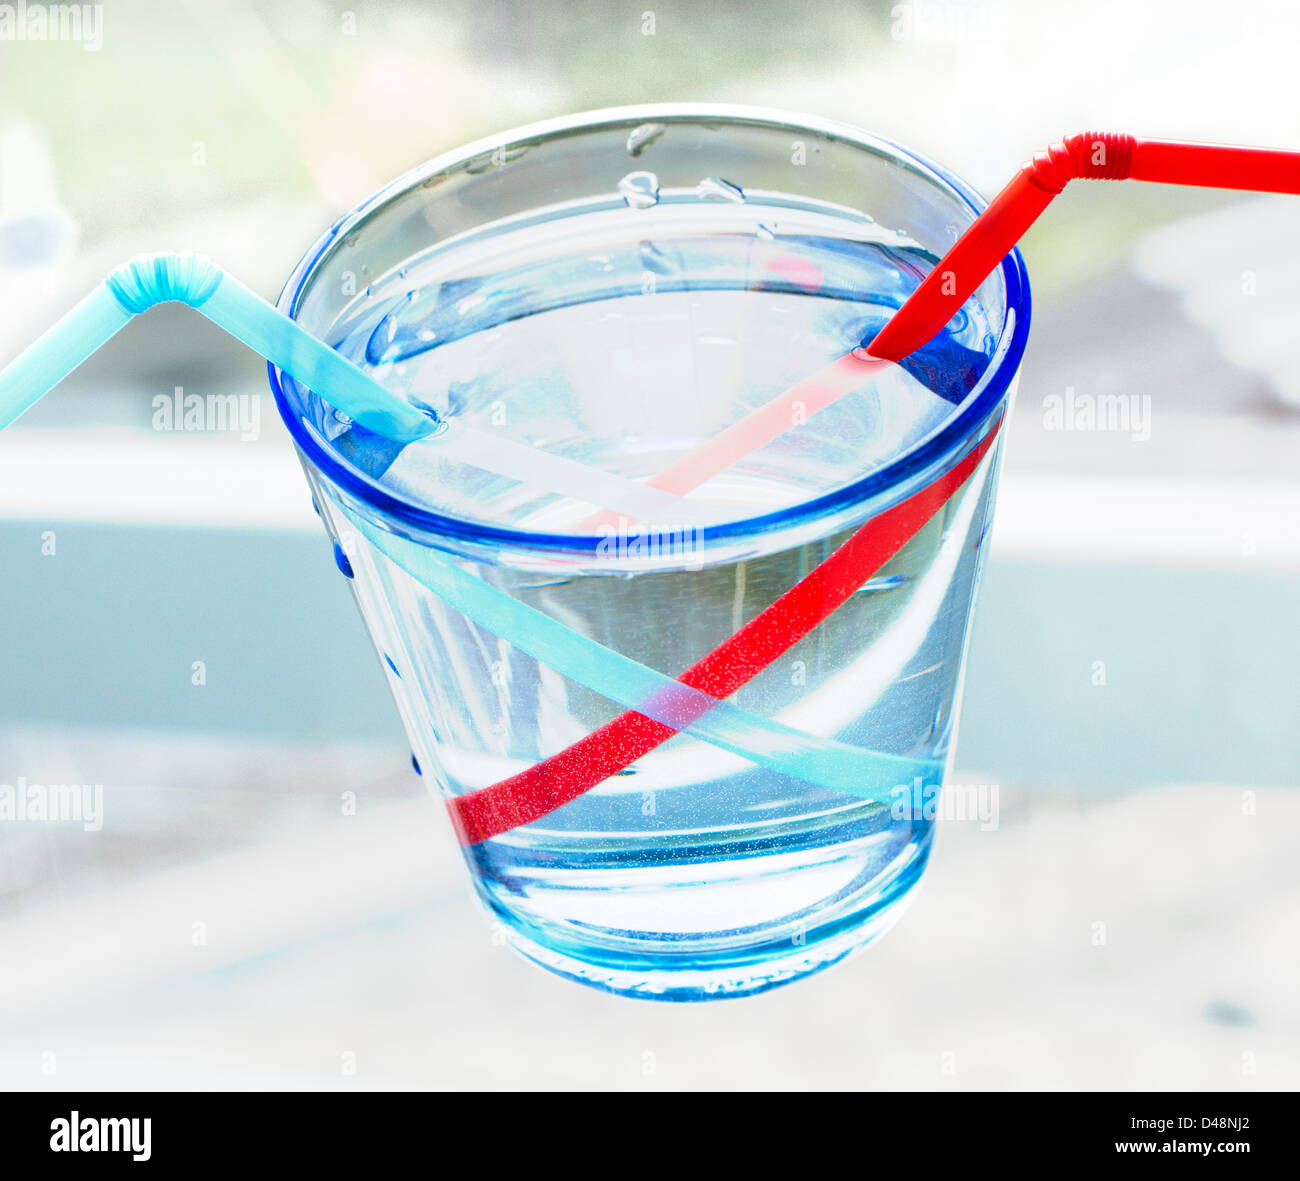 Glass with two straws showing refraction in the water Stock Photo